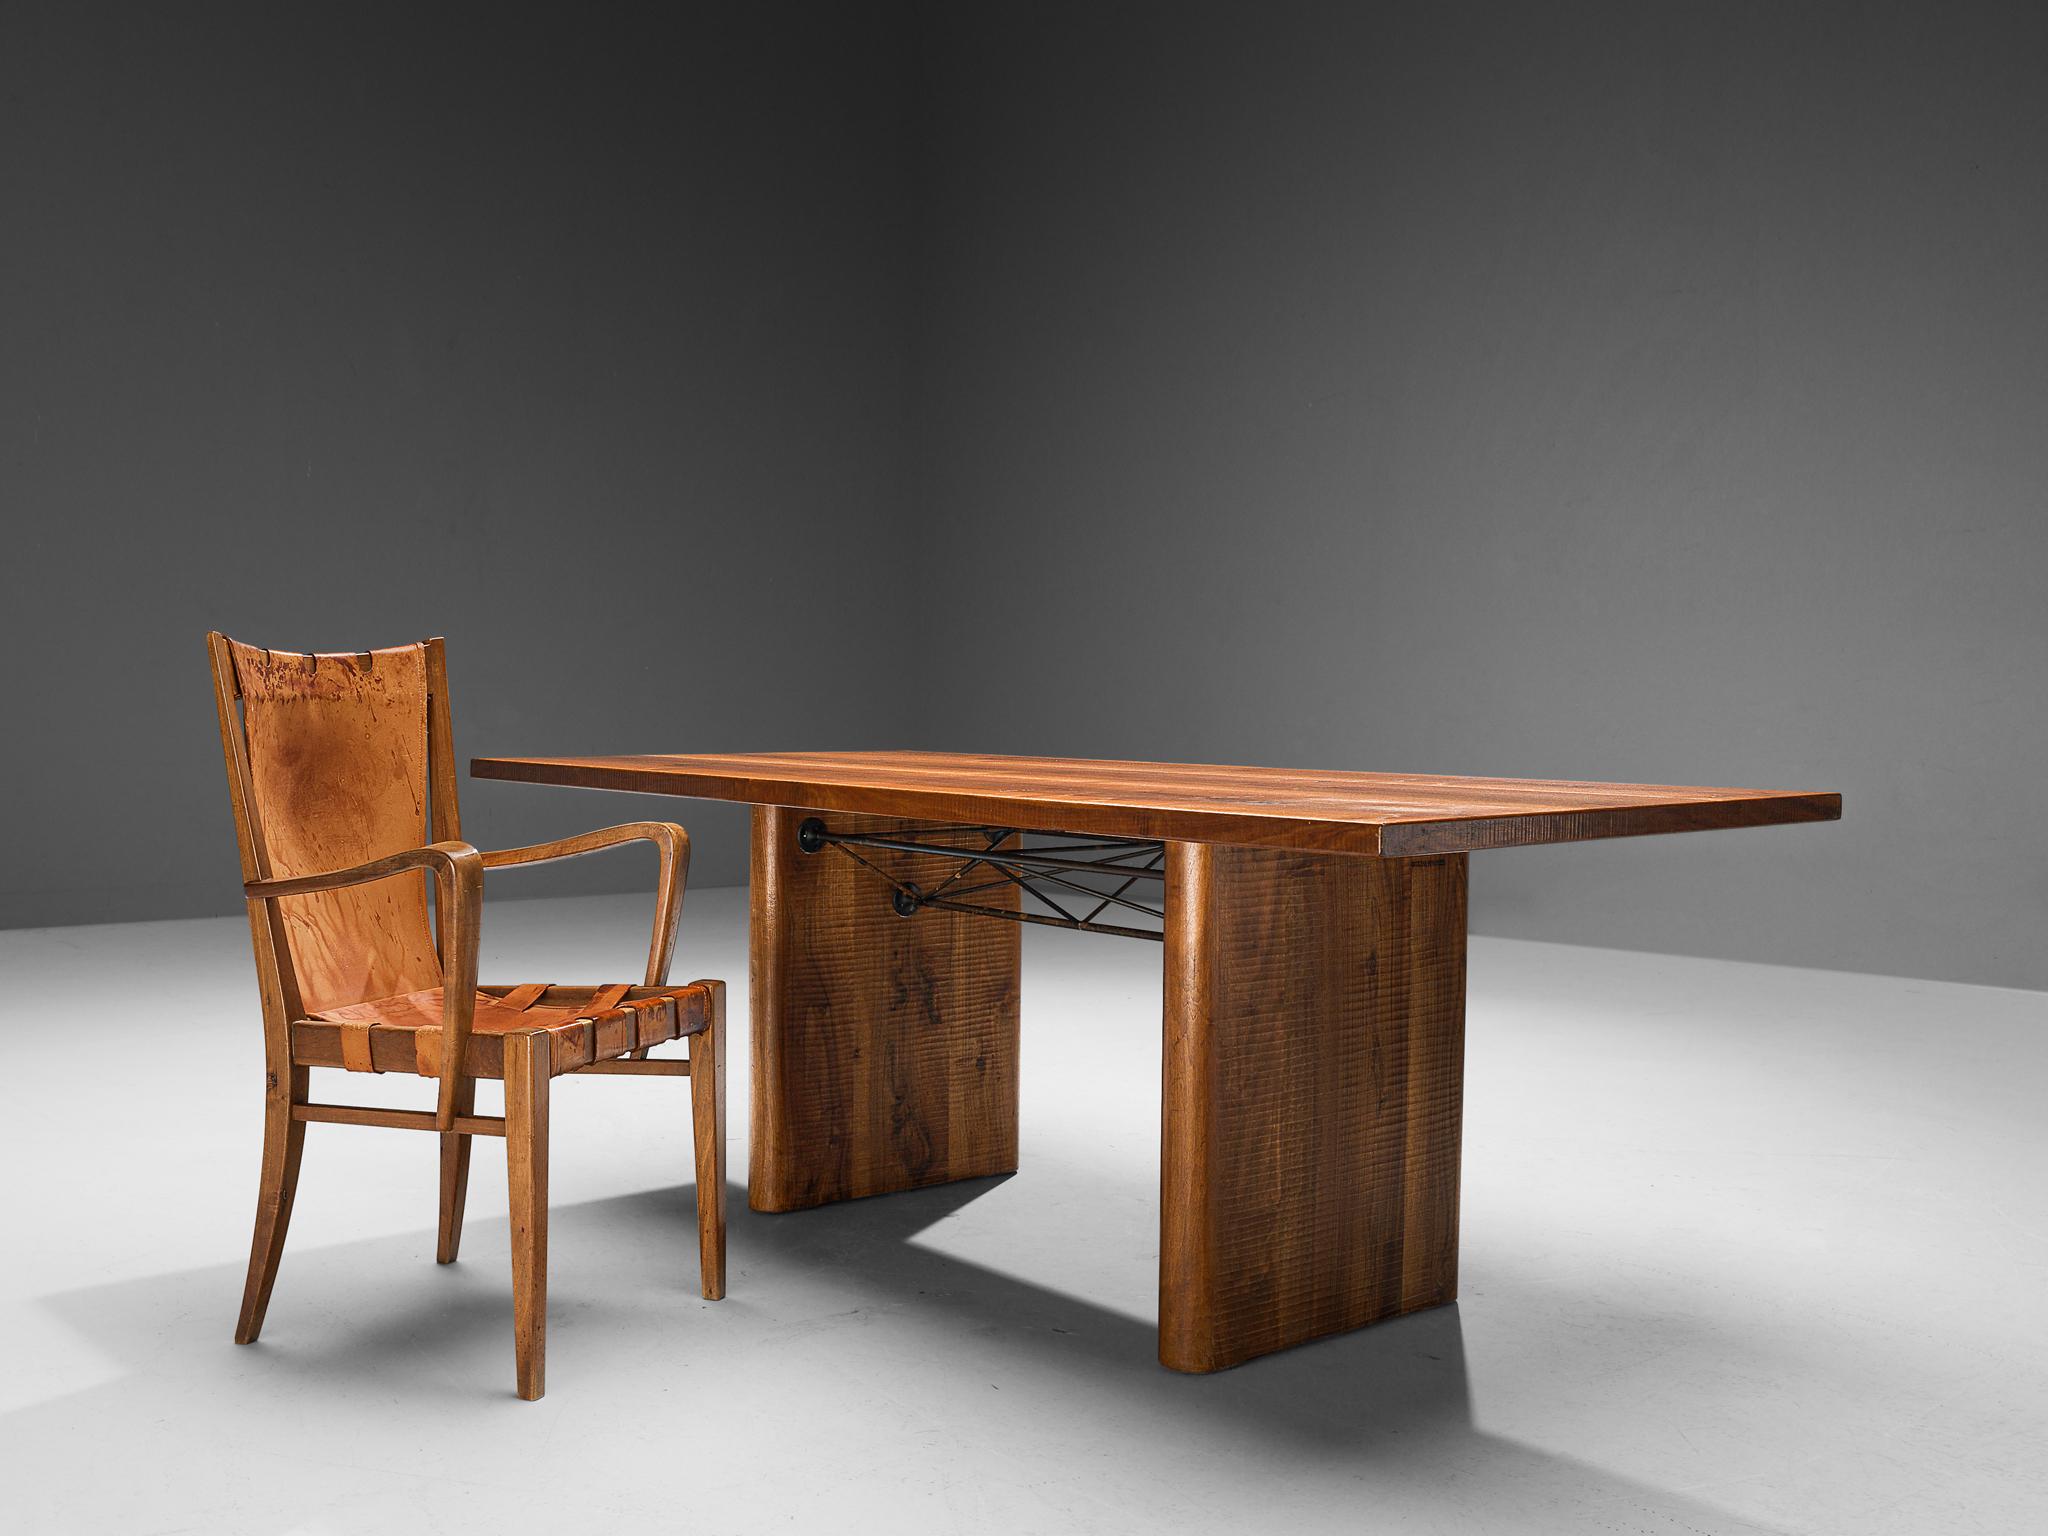 Giuseppe Rivadossi for Officina Rivadossi writing desk combined with Guglielmo Pecorini chair 


Giuseppe Rivadossi for Officina Rivadossi, writing desk, walnut, metal, Italy, 1970s

Giuseppe Rivadossi once again proves his great eye for